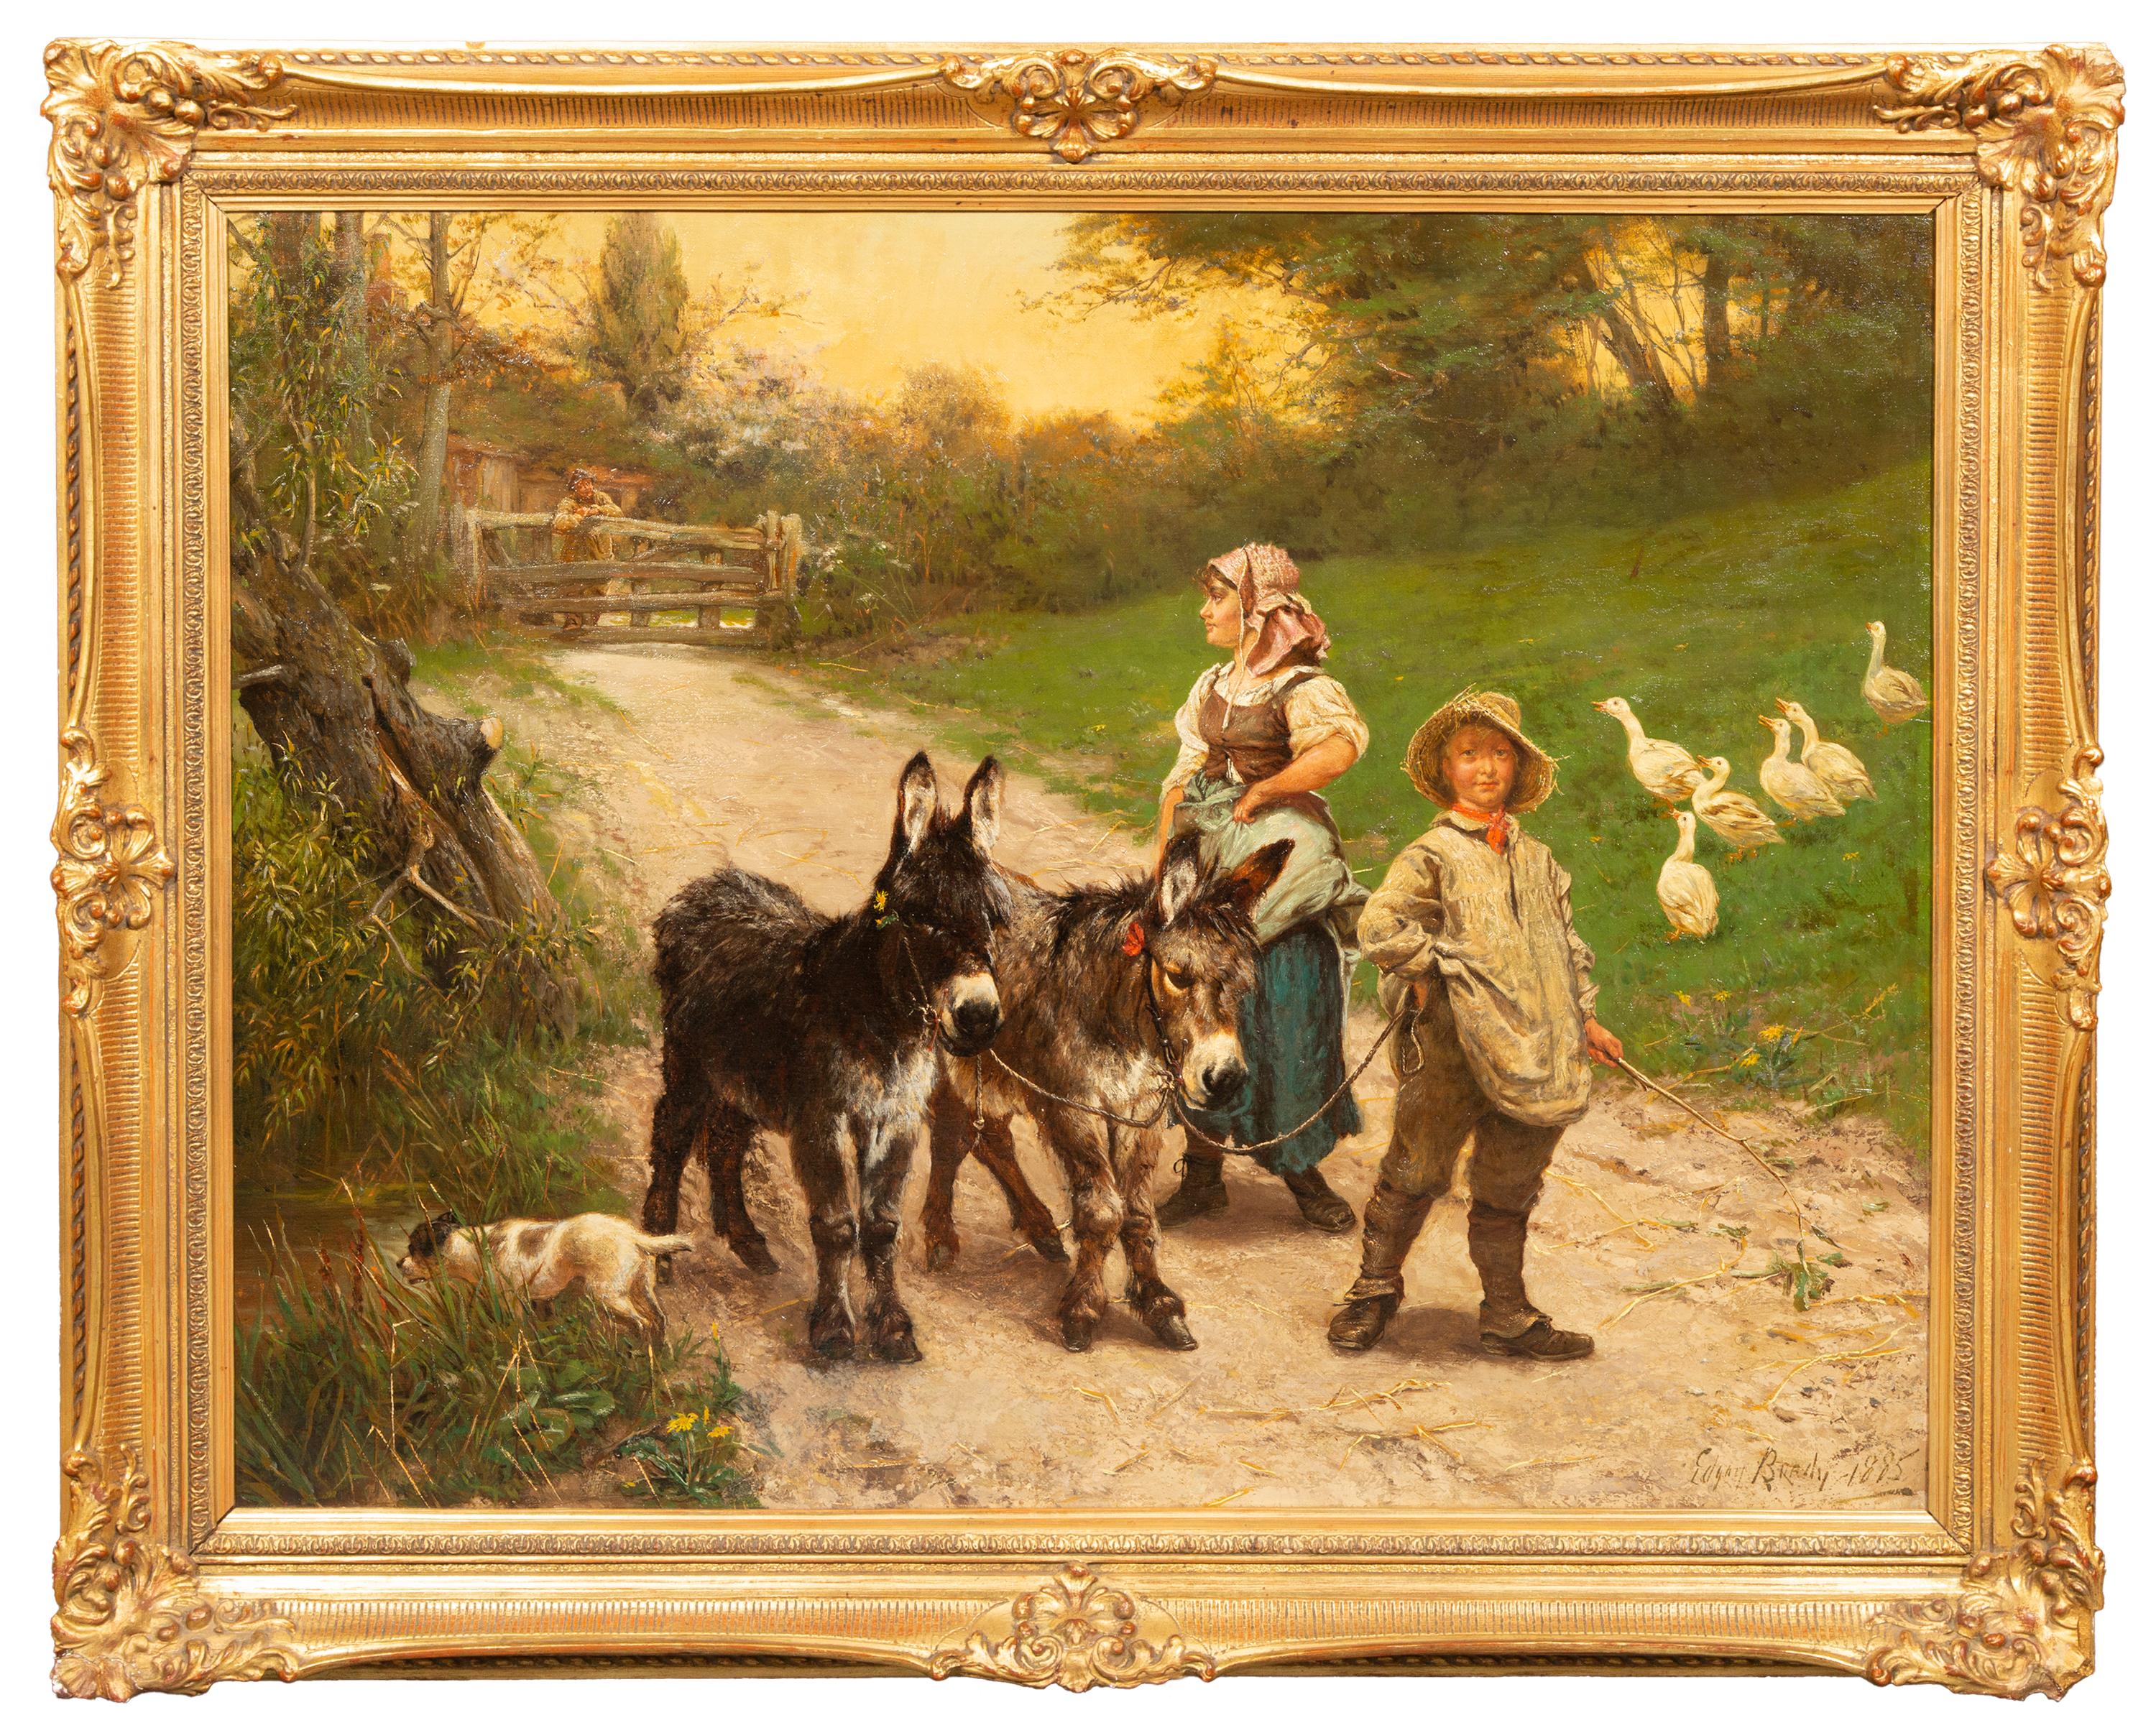 Edgar Bundy
Brighton 1862 – 1922 London
British Painter

‘Peasant Children walking the Donkeys’

Signature: signed lower right and dated ‘Edgar Bundy 1885' Medium: oil on canvas 
Dimensions: image size 71 x 92 cm, frame size 87 x 107,5 cm

Notes: